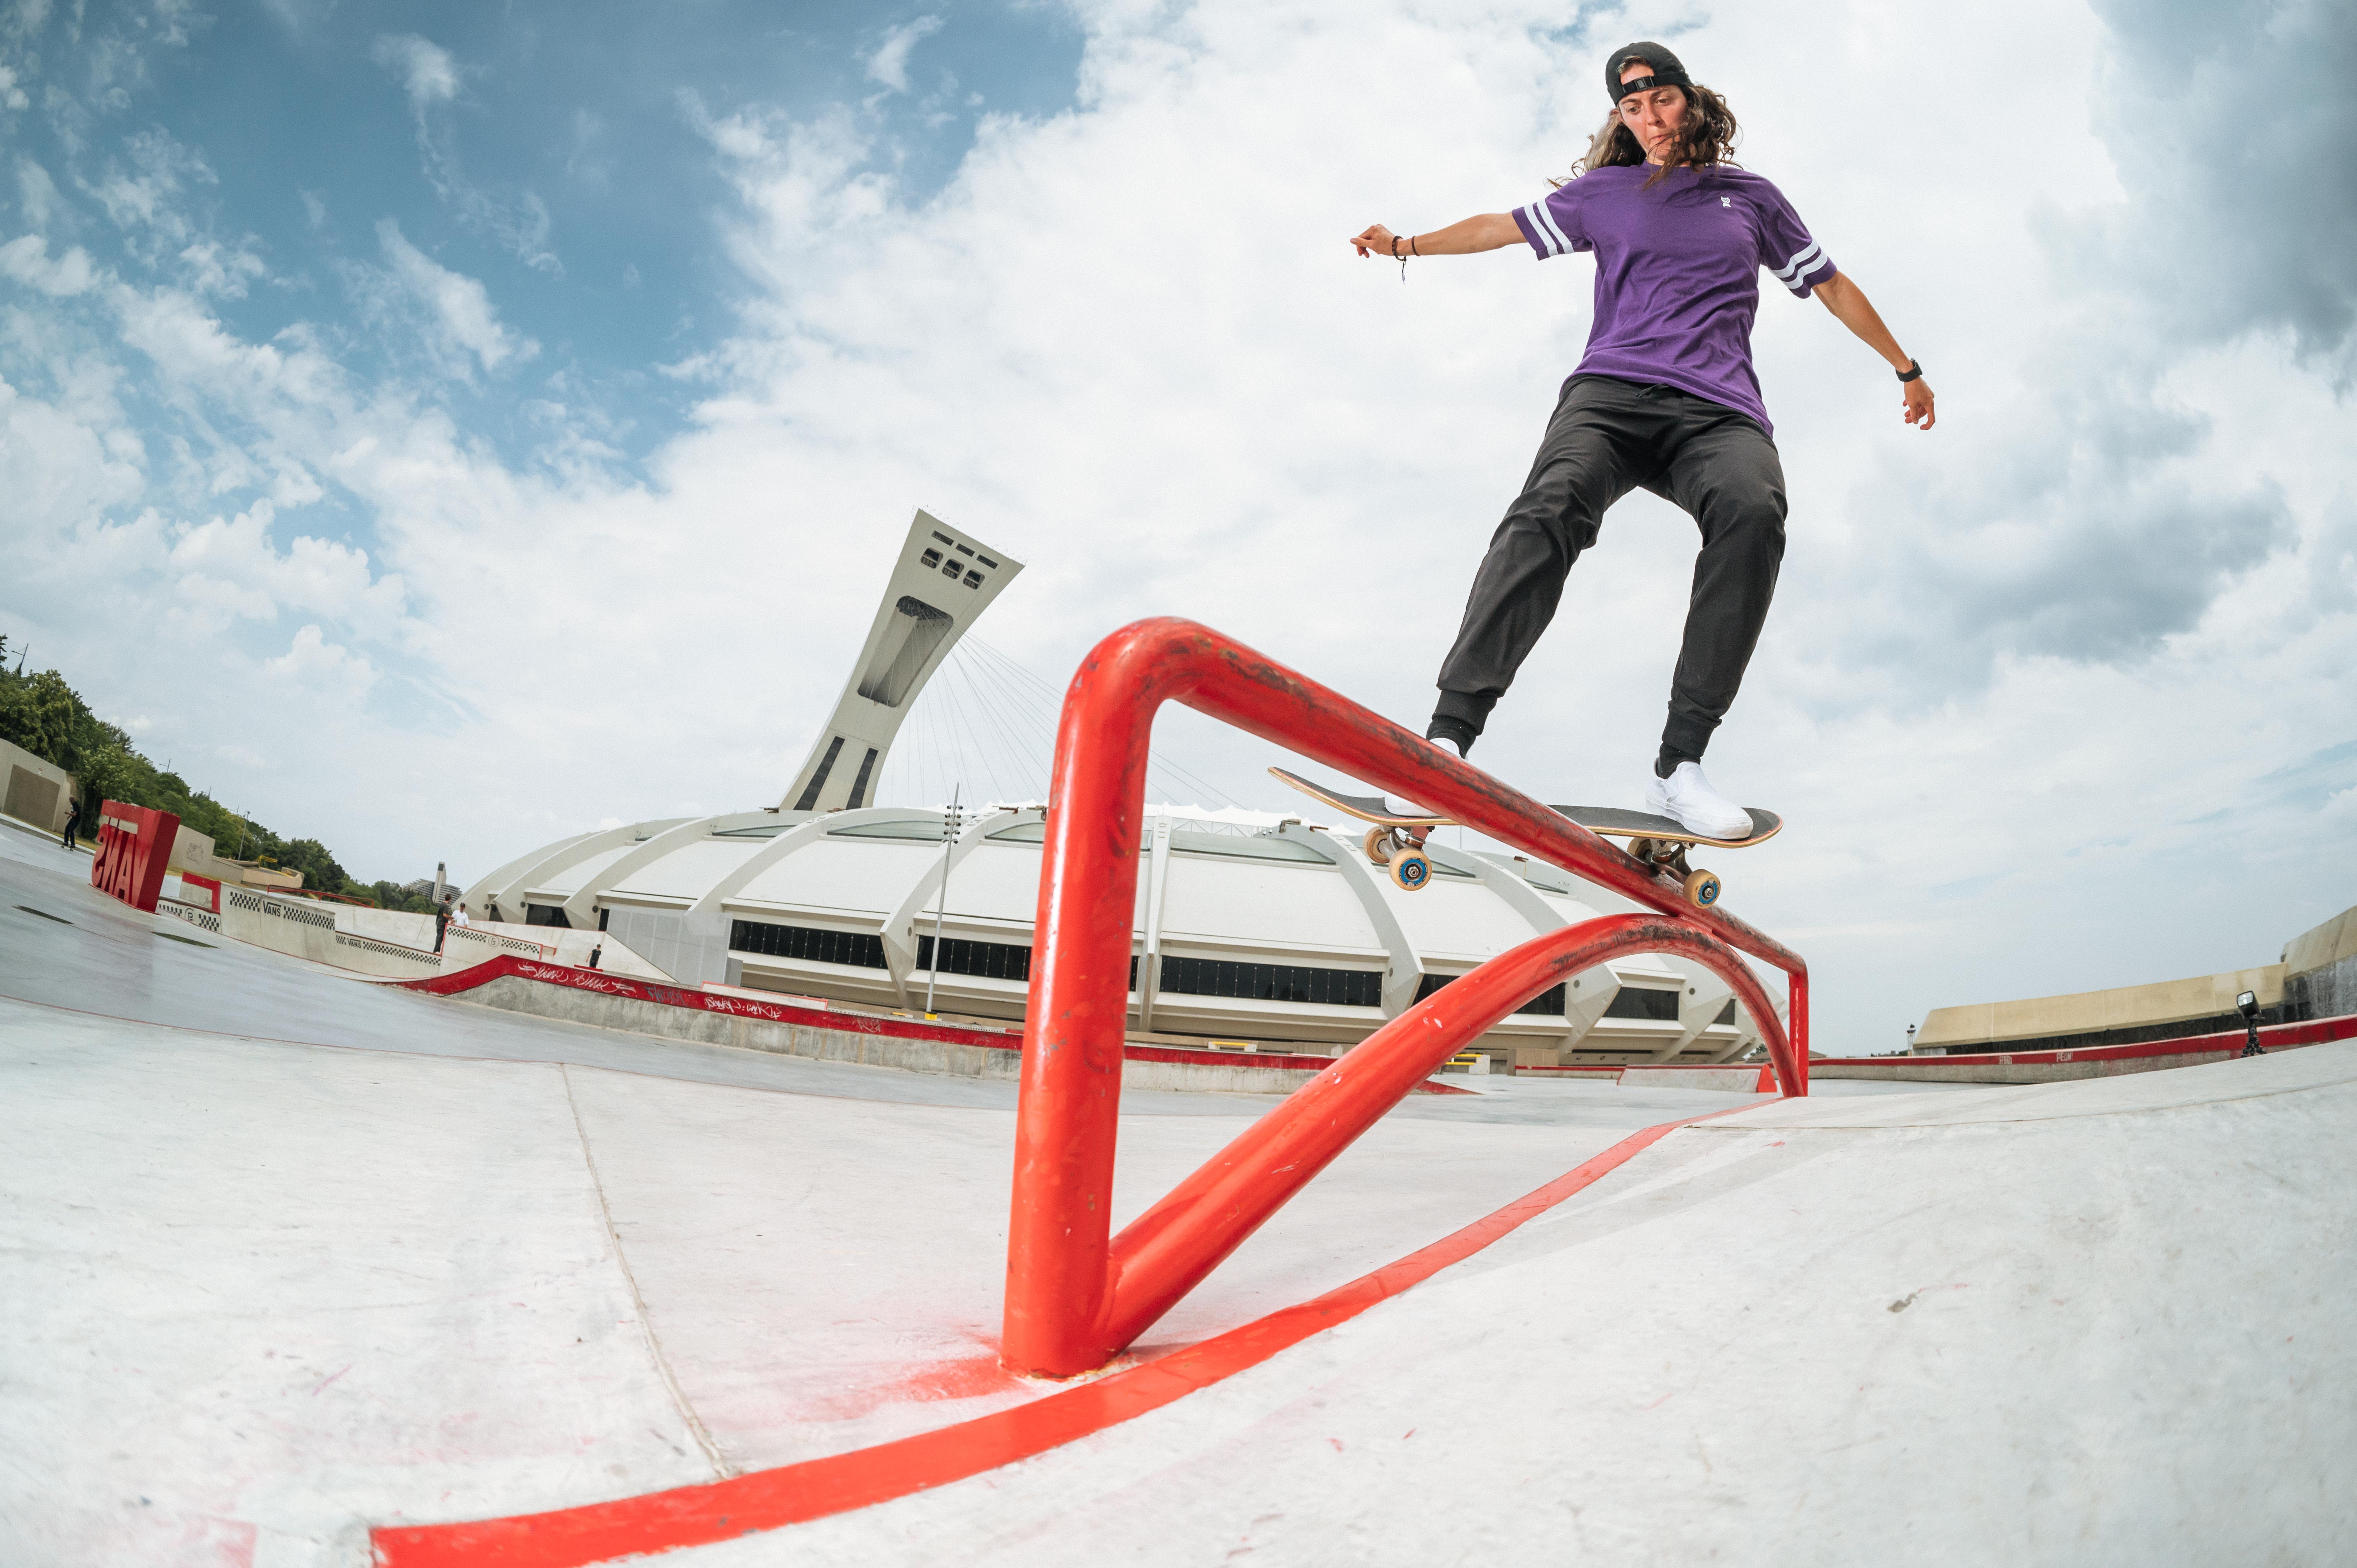 Vans – Professional athletes introducing youth to skateboarding